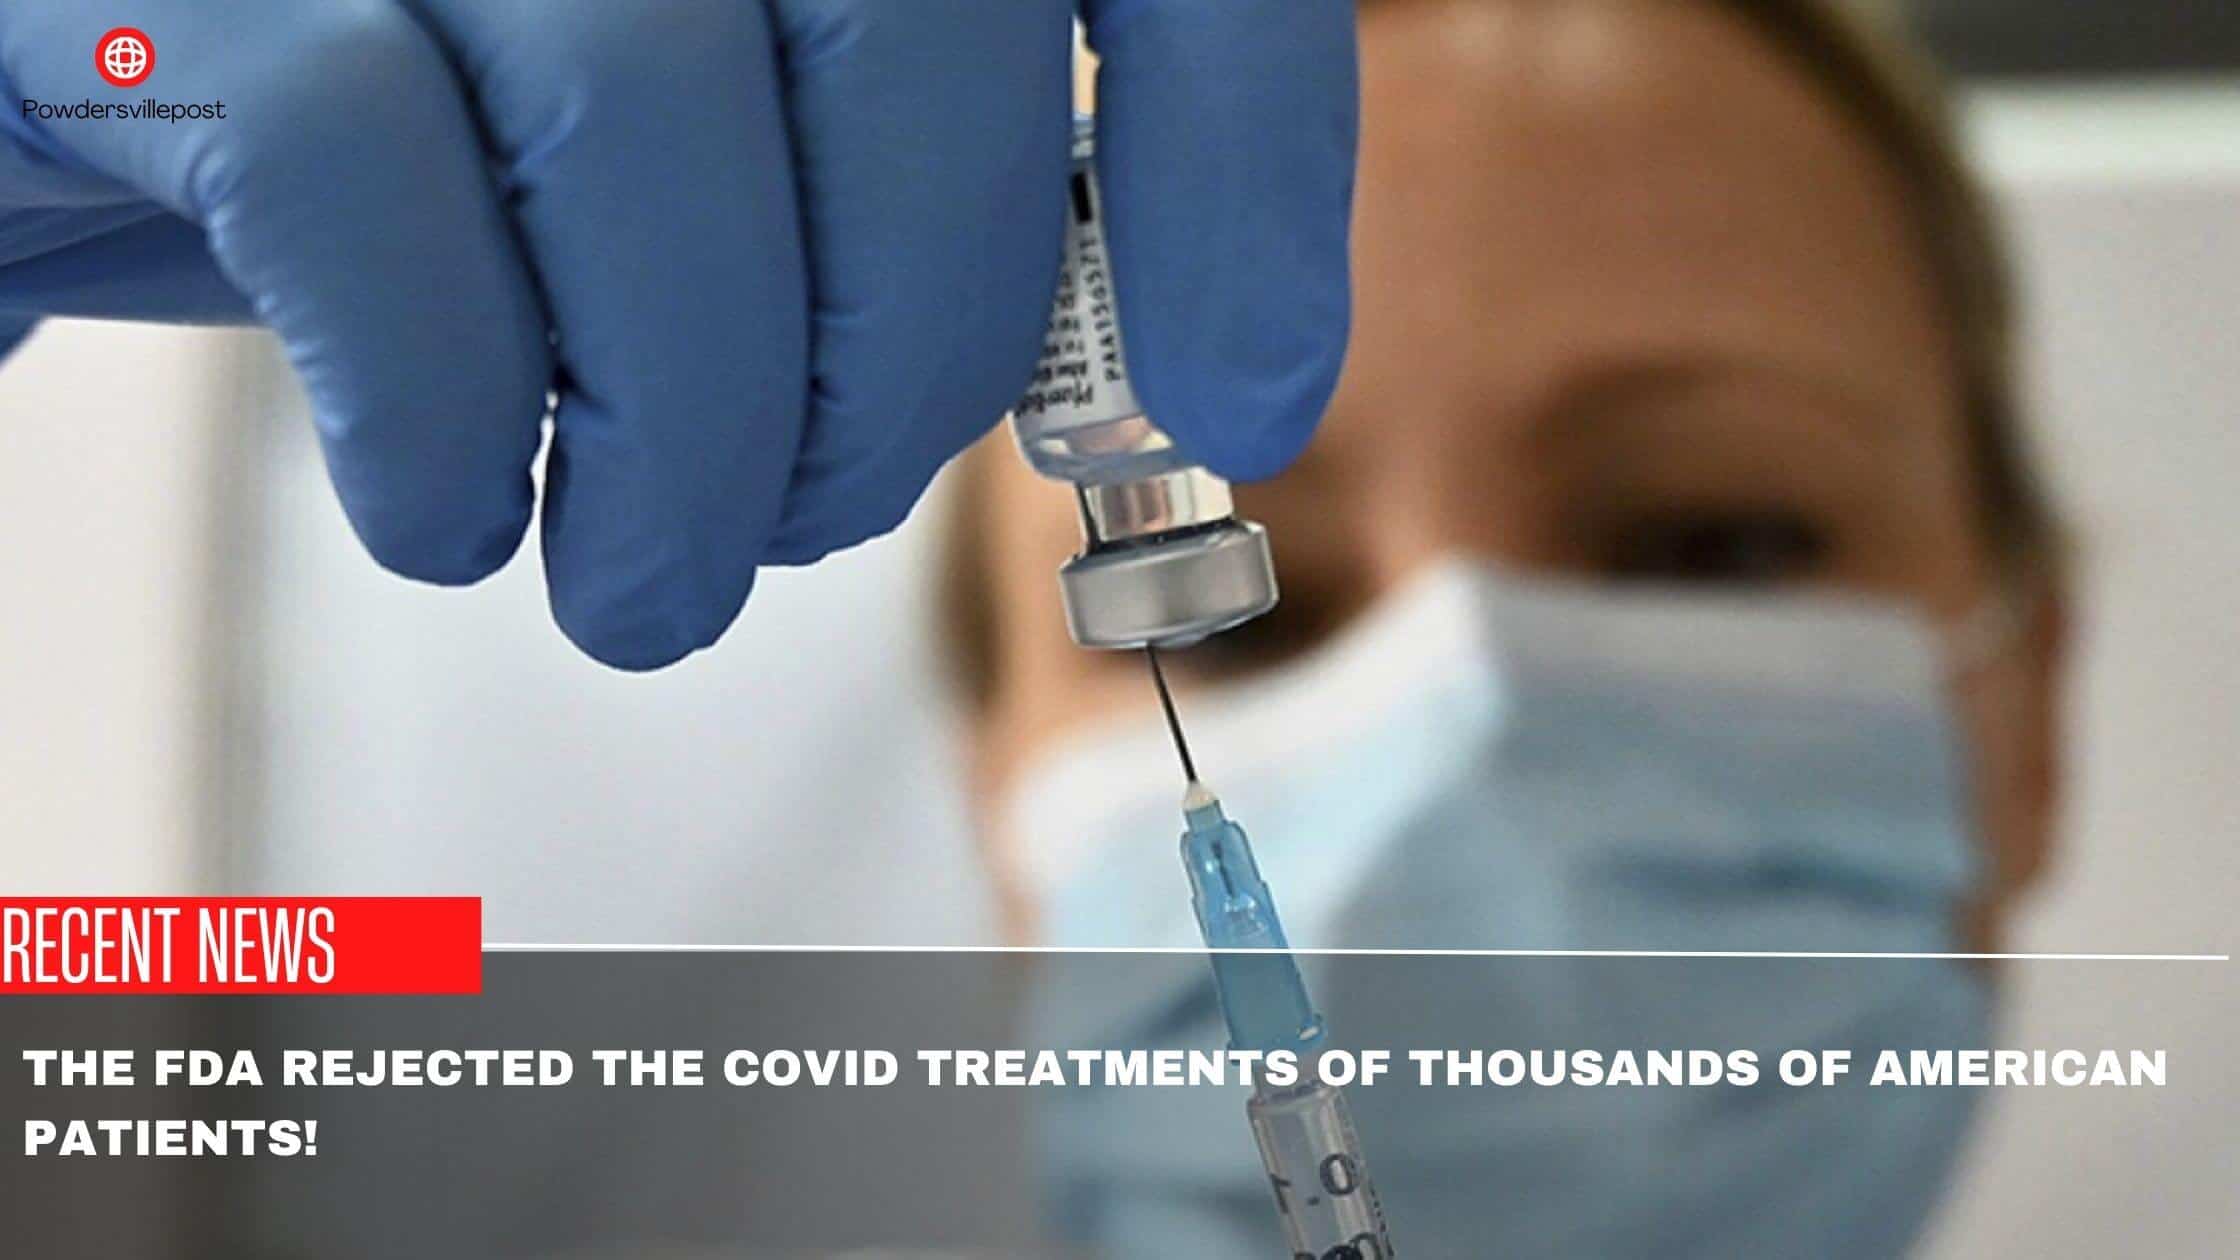 The FDA Rejected The COVID Treatments Of Thousands Of American Patients!